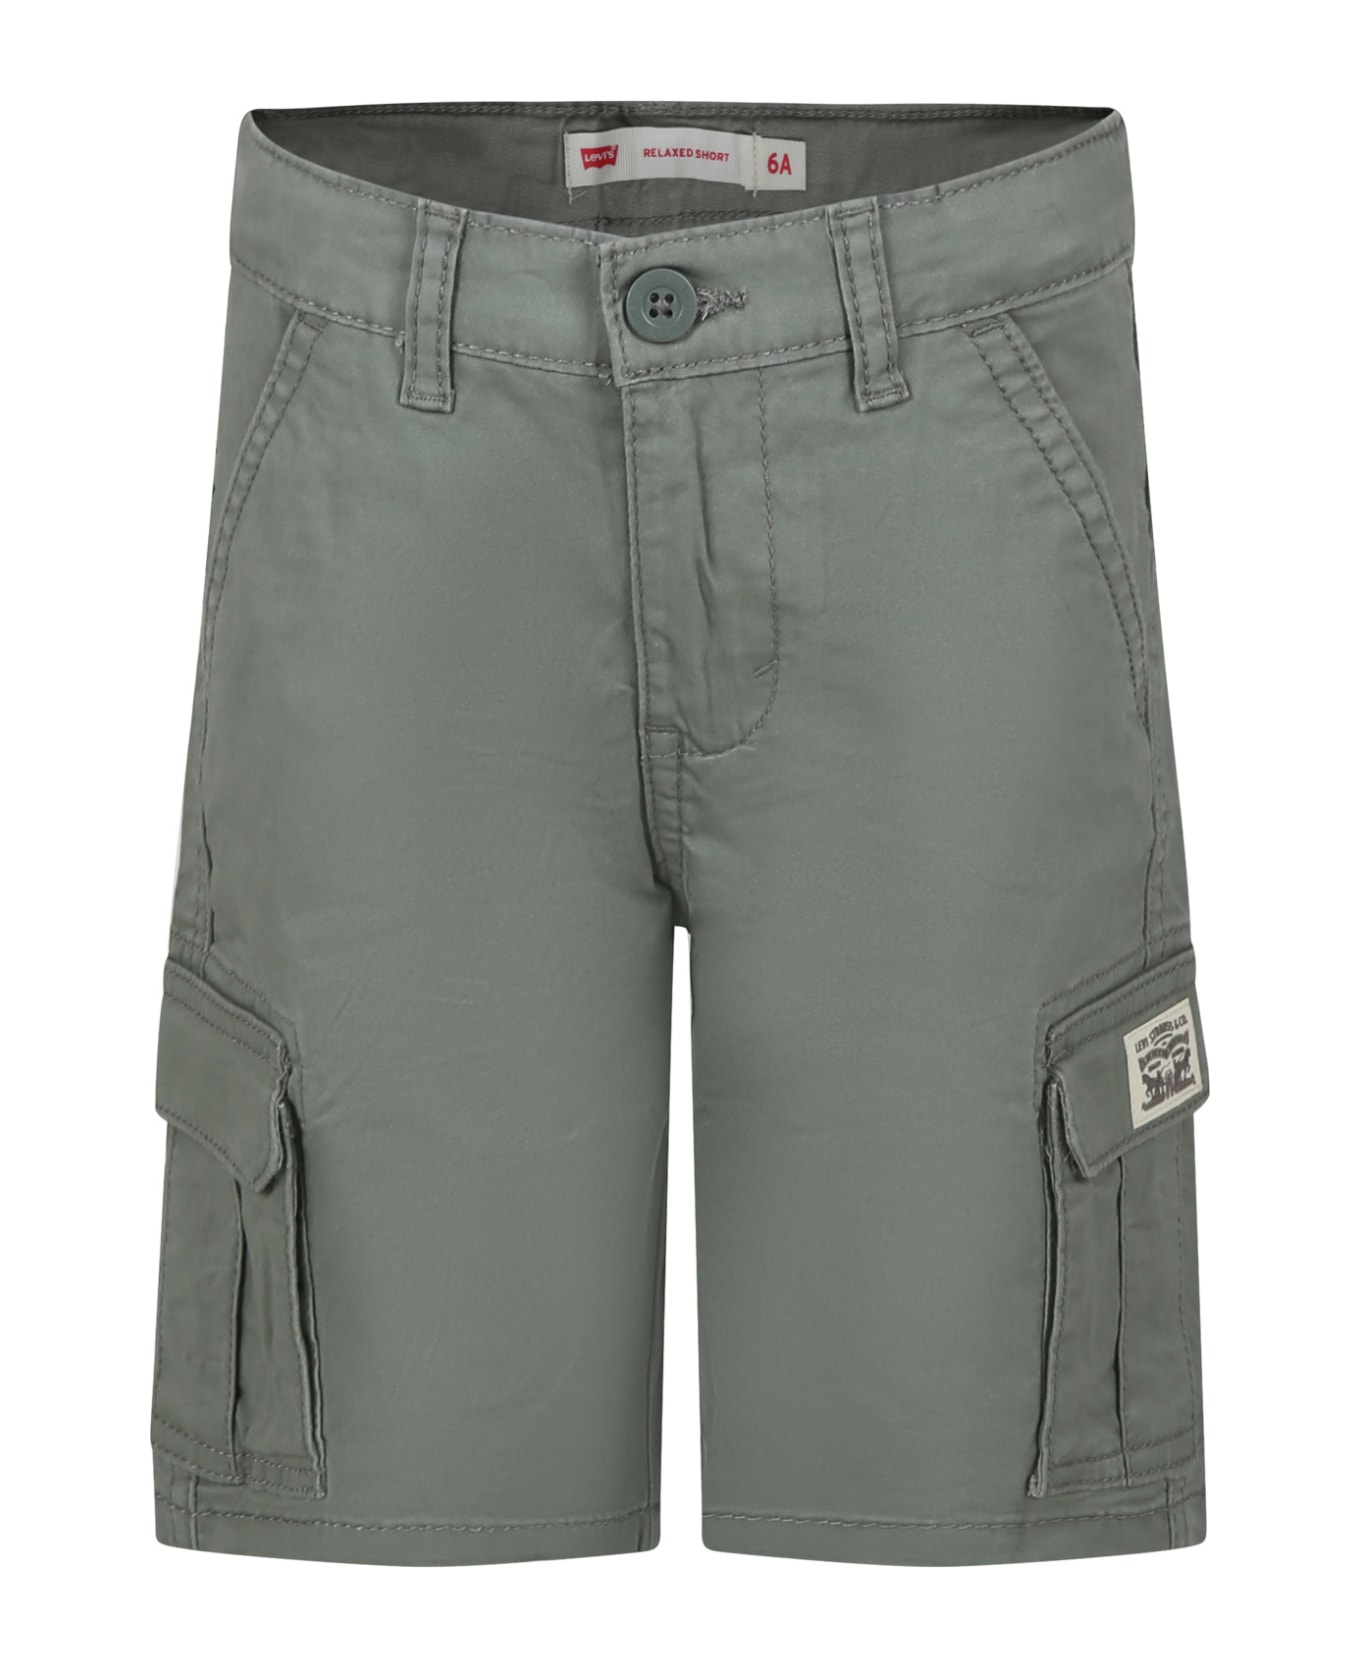 Levi's Green Casual Shorts For Boy - Green ボトムス